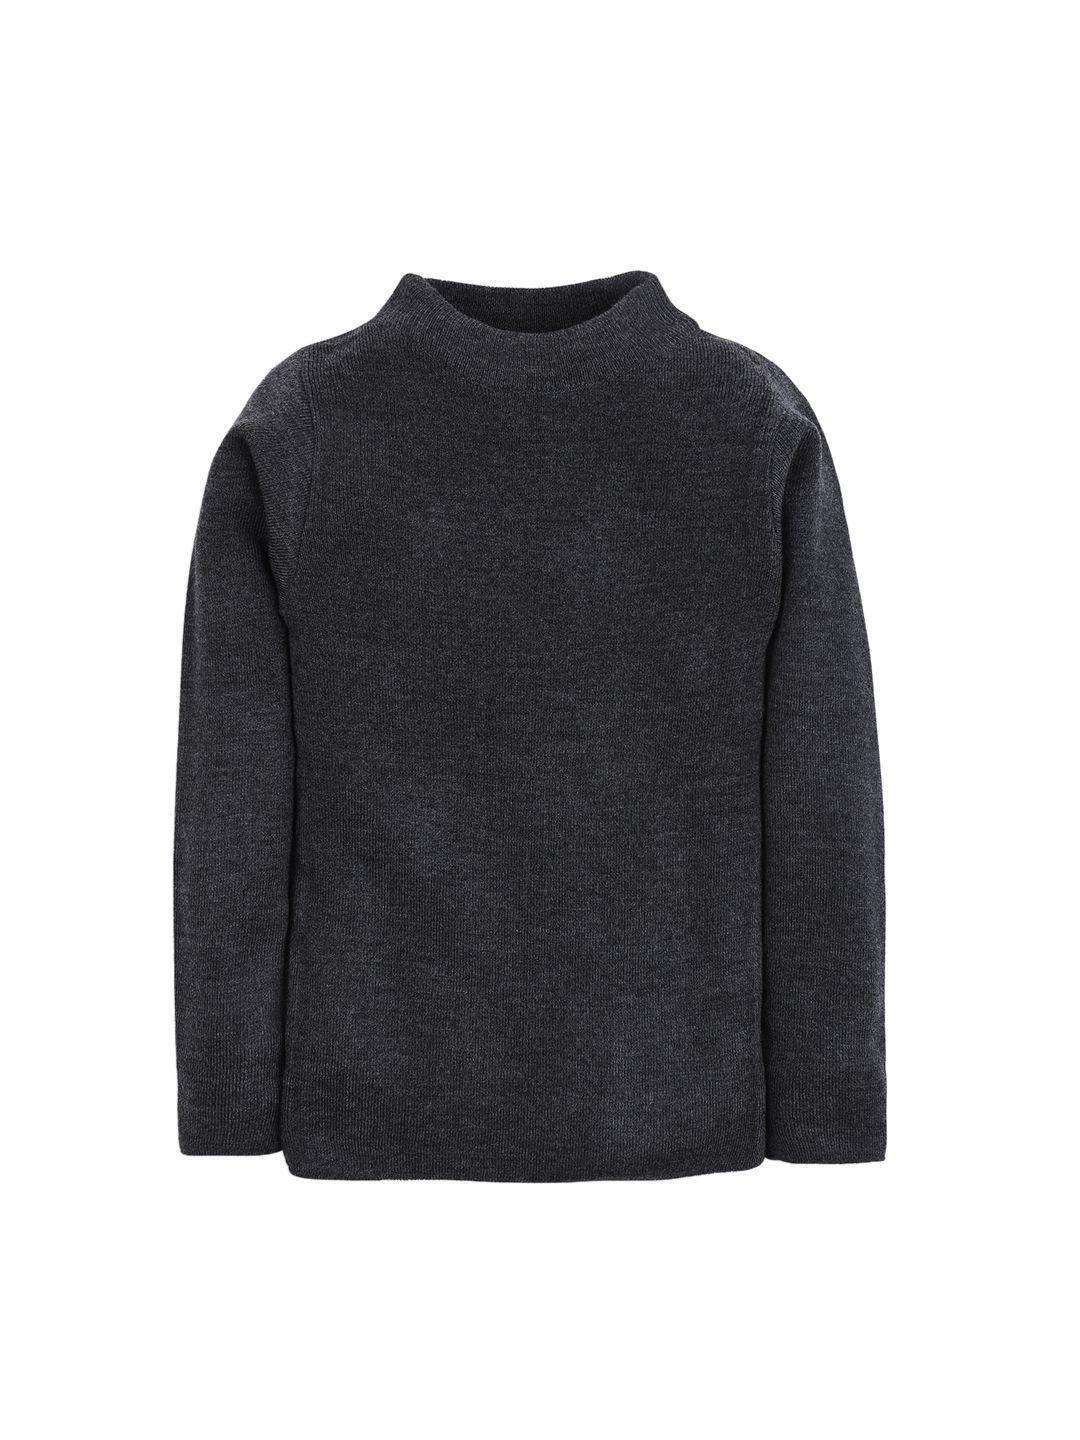 rvk unisex charcoal solid sweater